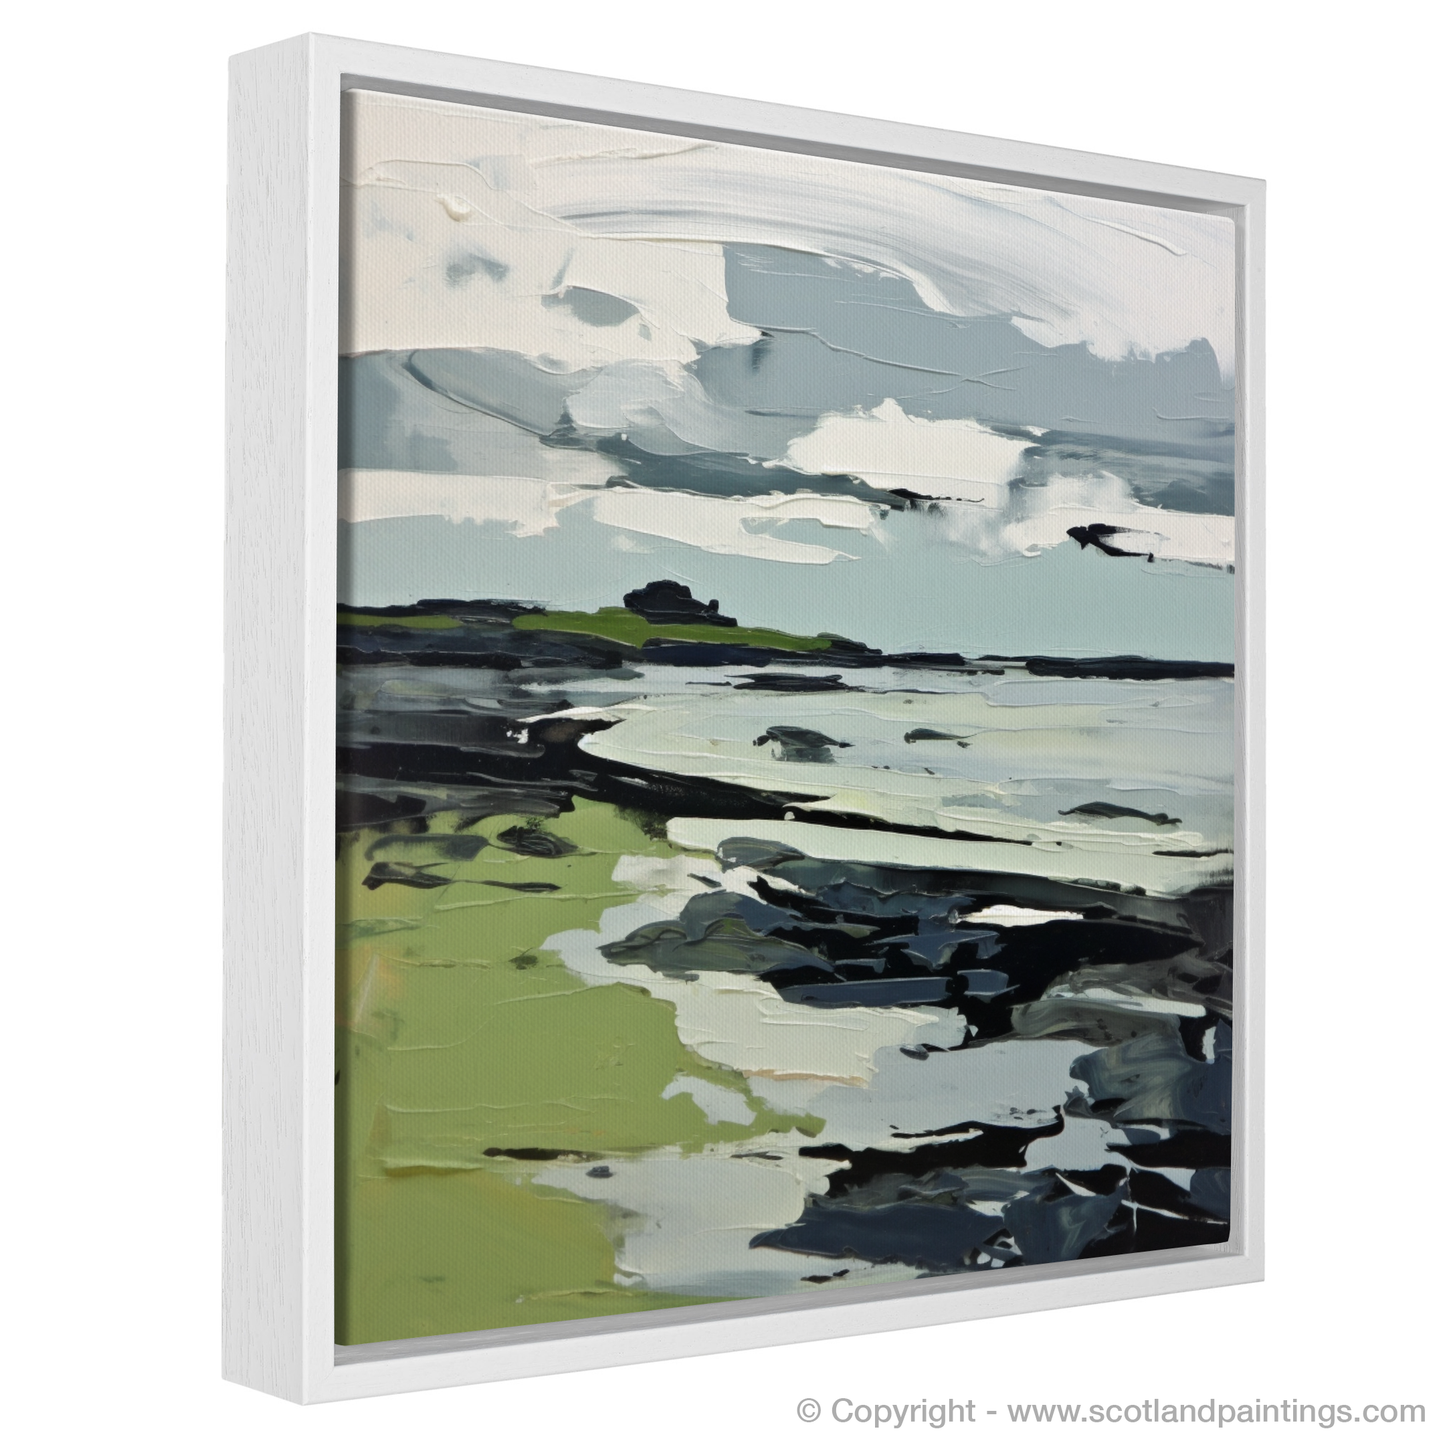 Painting and Art Print of Largo Bay, Fife entitled "Largo Bay Unleashed: An Expressionist Ode to Scottish Shores".